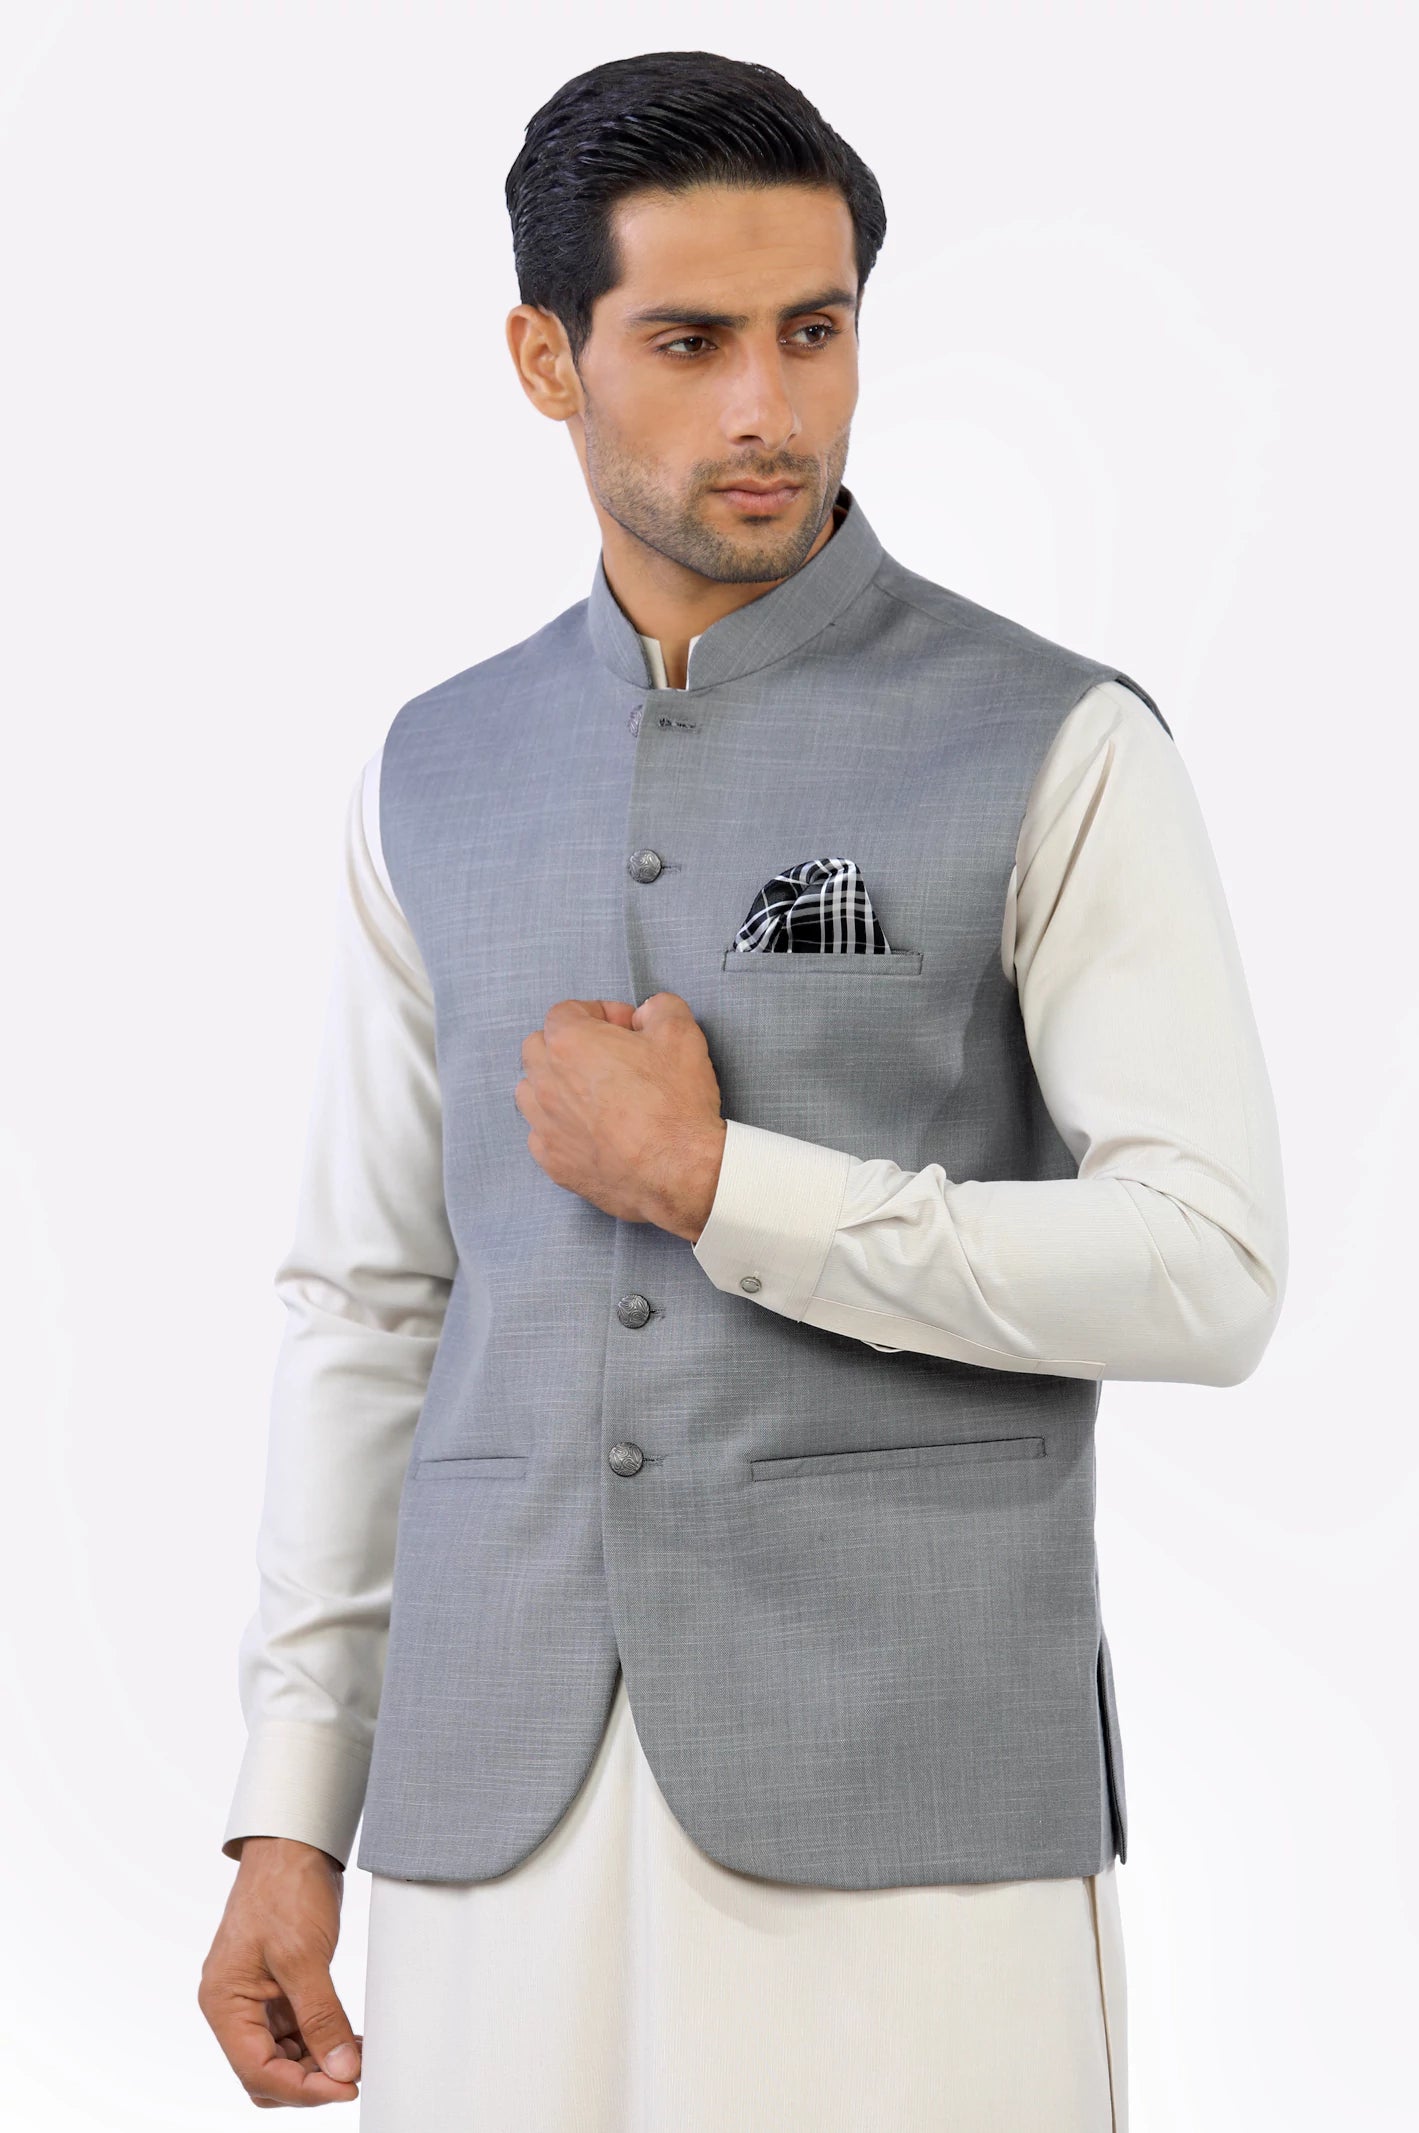 Light Grey Waistcoat From Diners